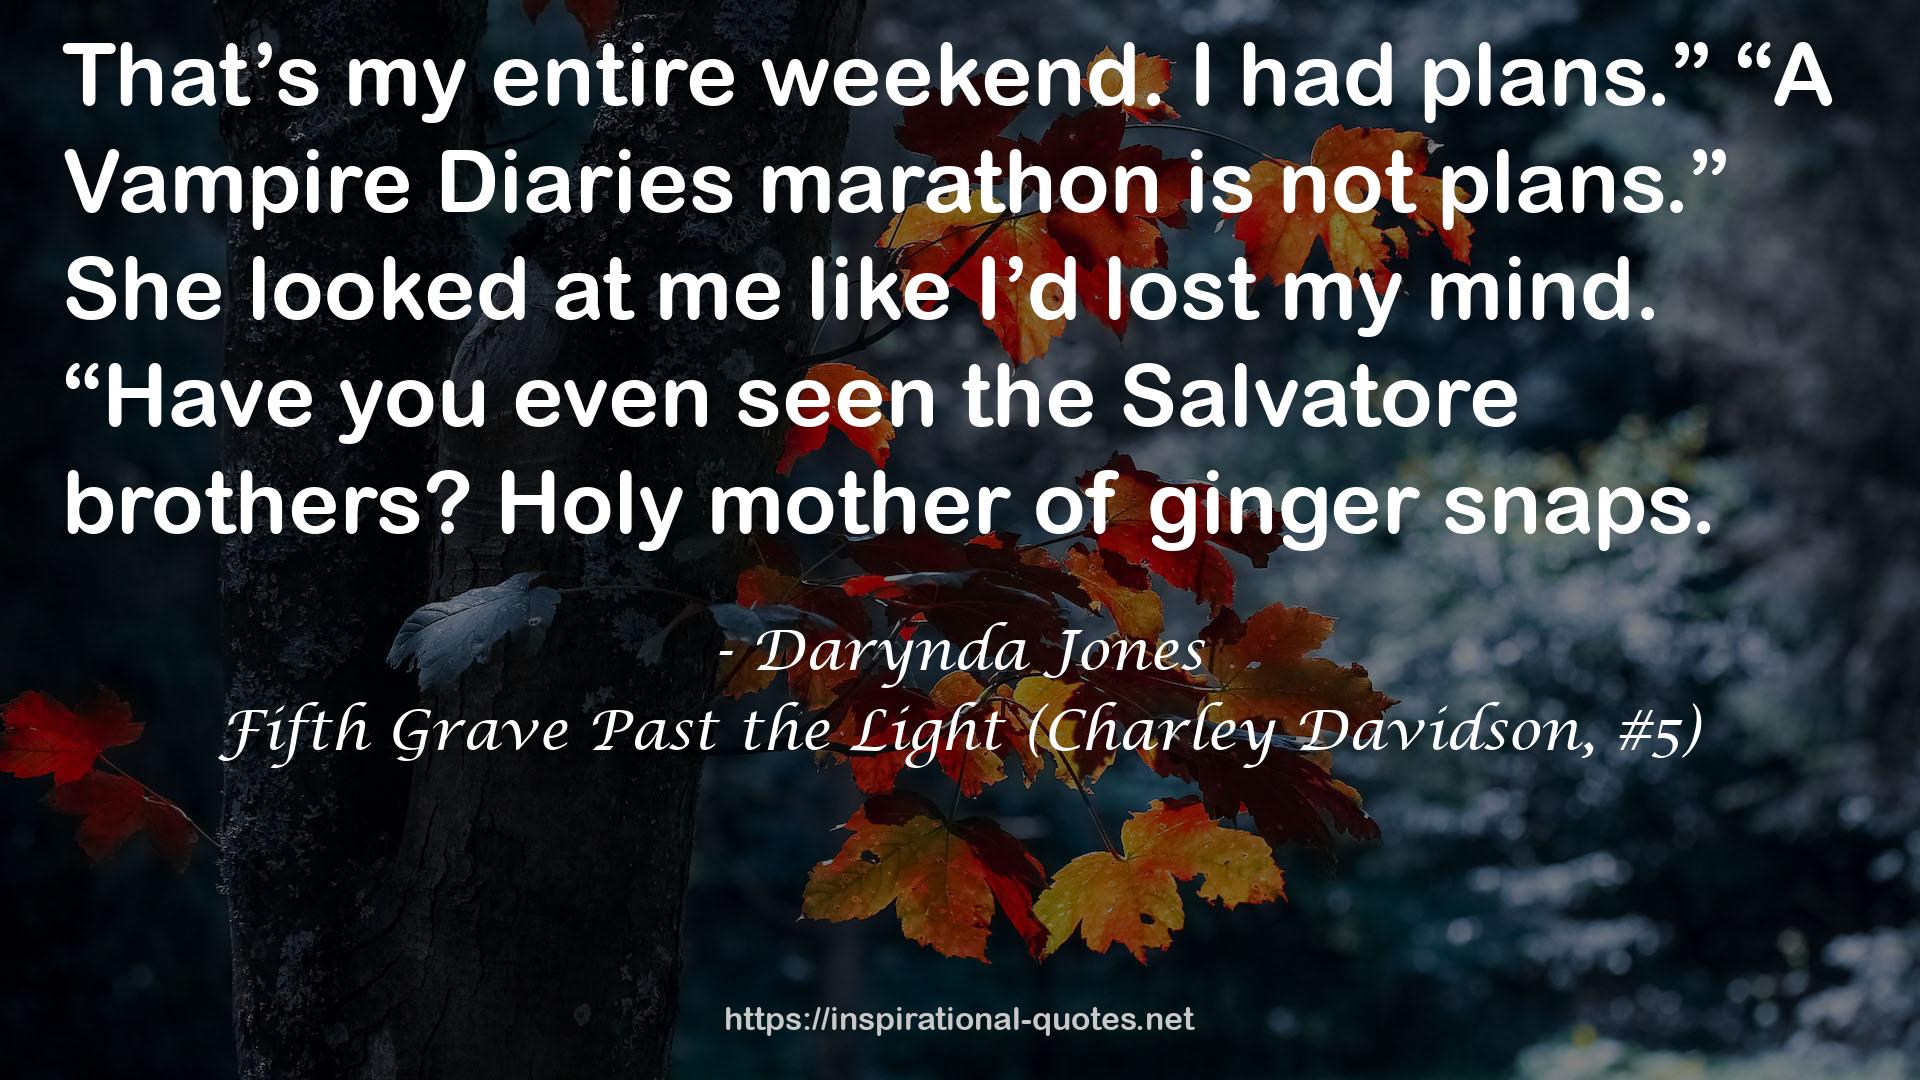 Fifth Grave Past the Light (Charley Davidson, #5) QUOTES